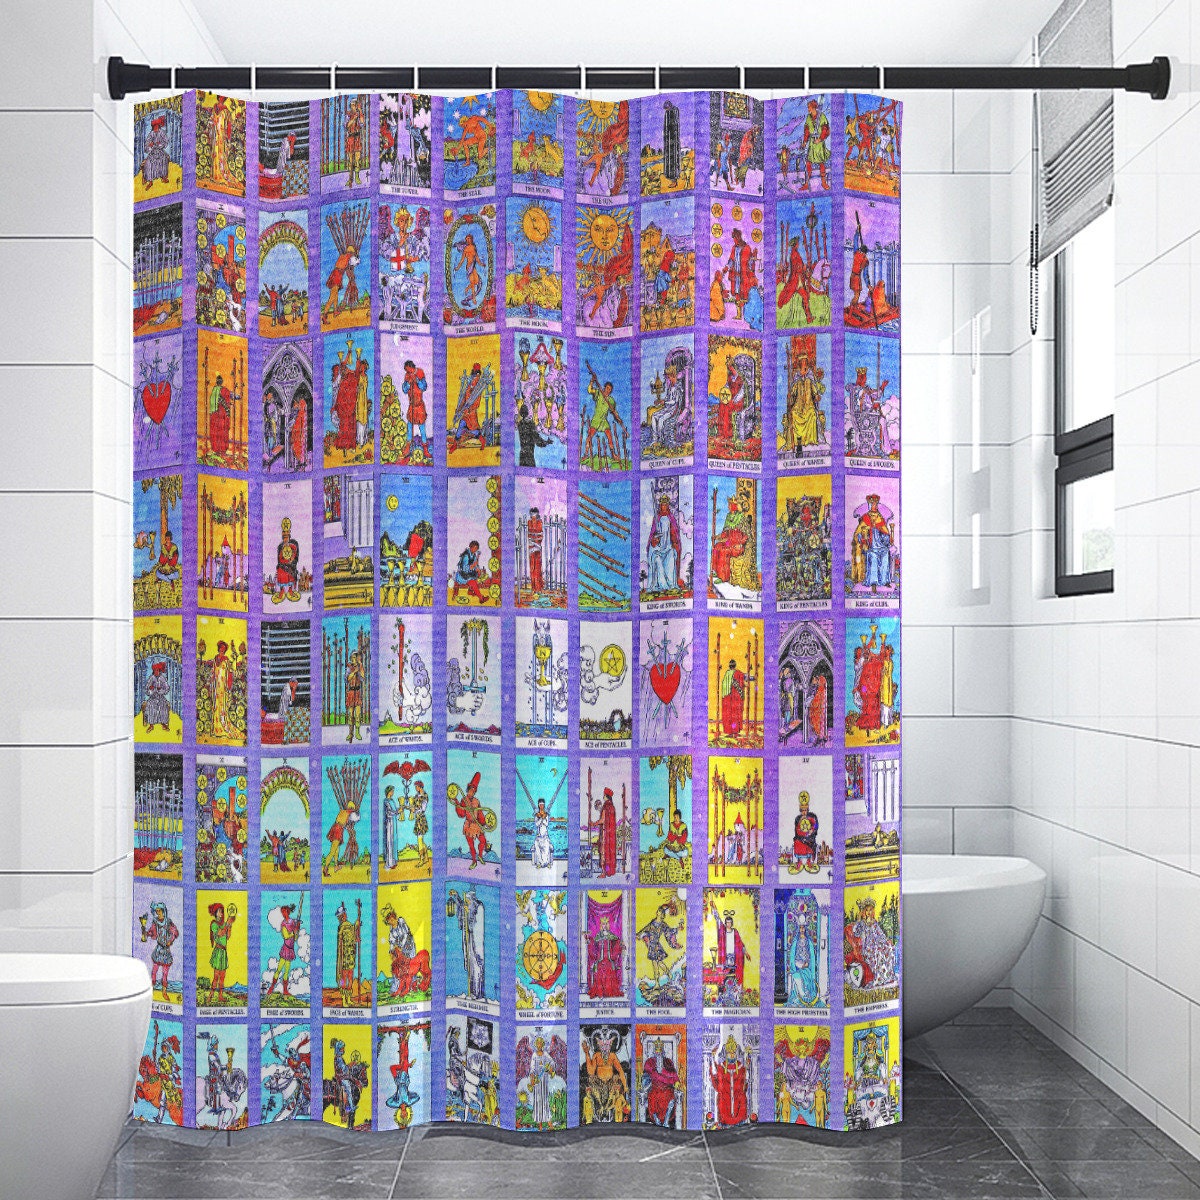 Waterproof Bath Shower Curtain With Stained Glass Mermaid in White